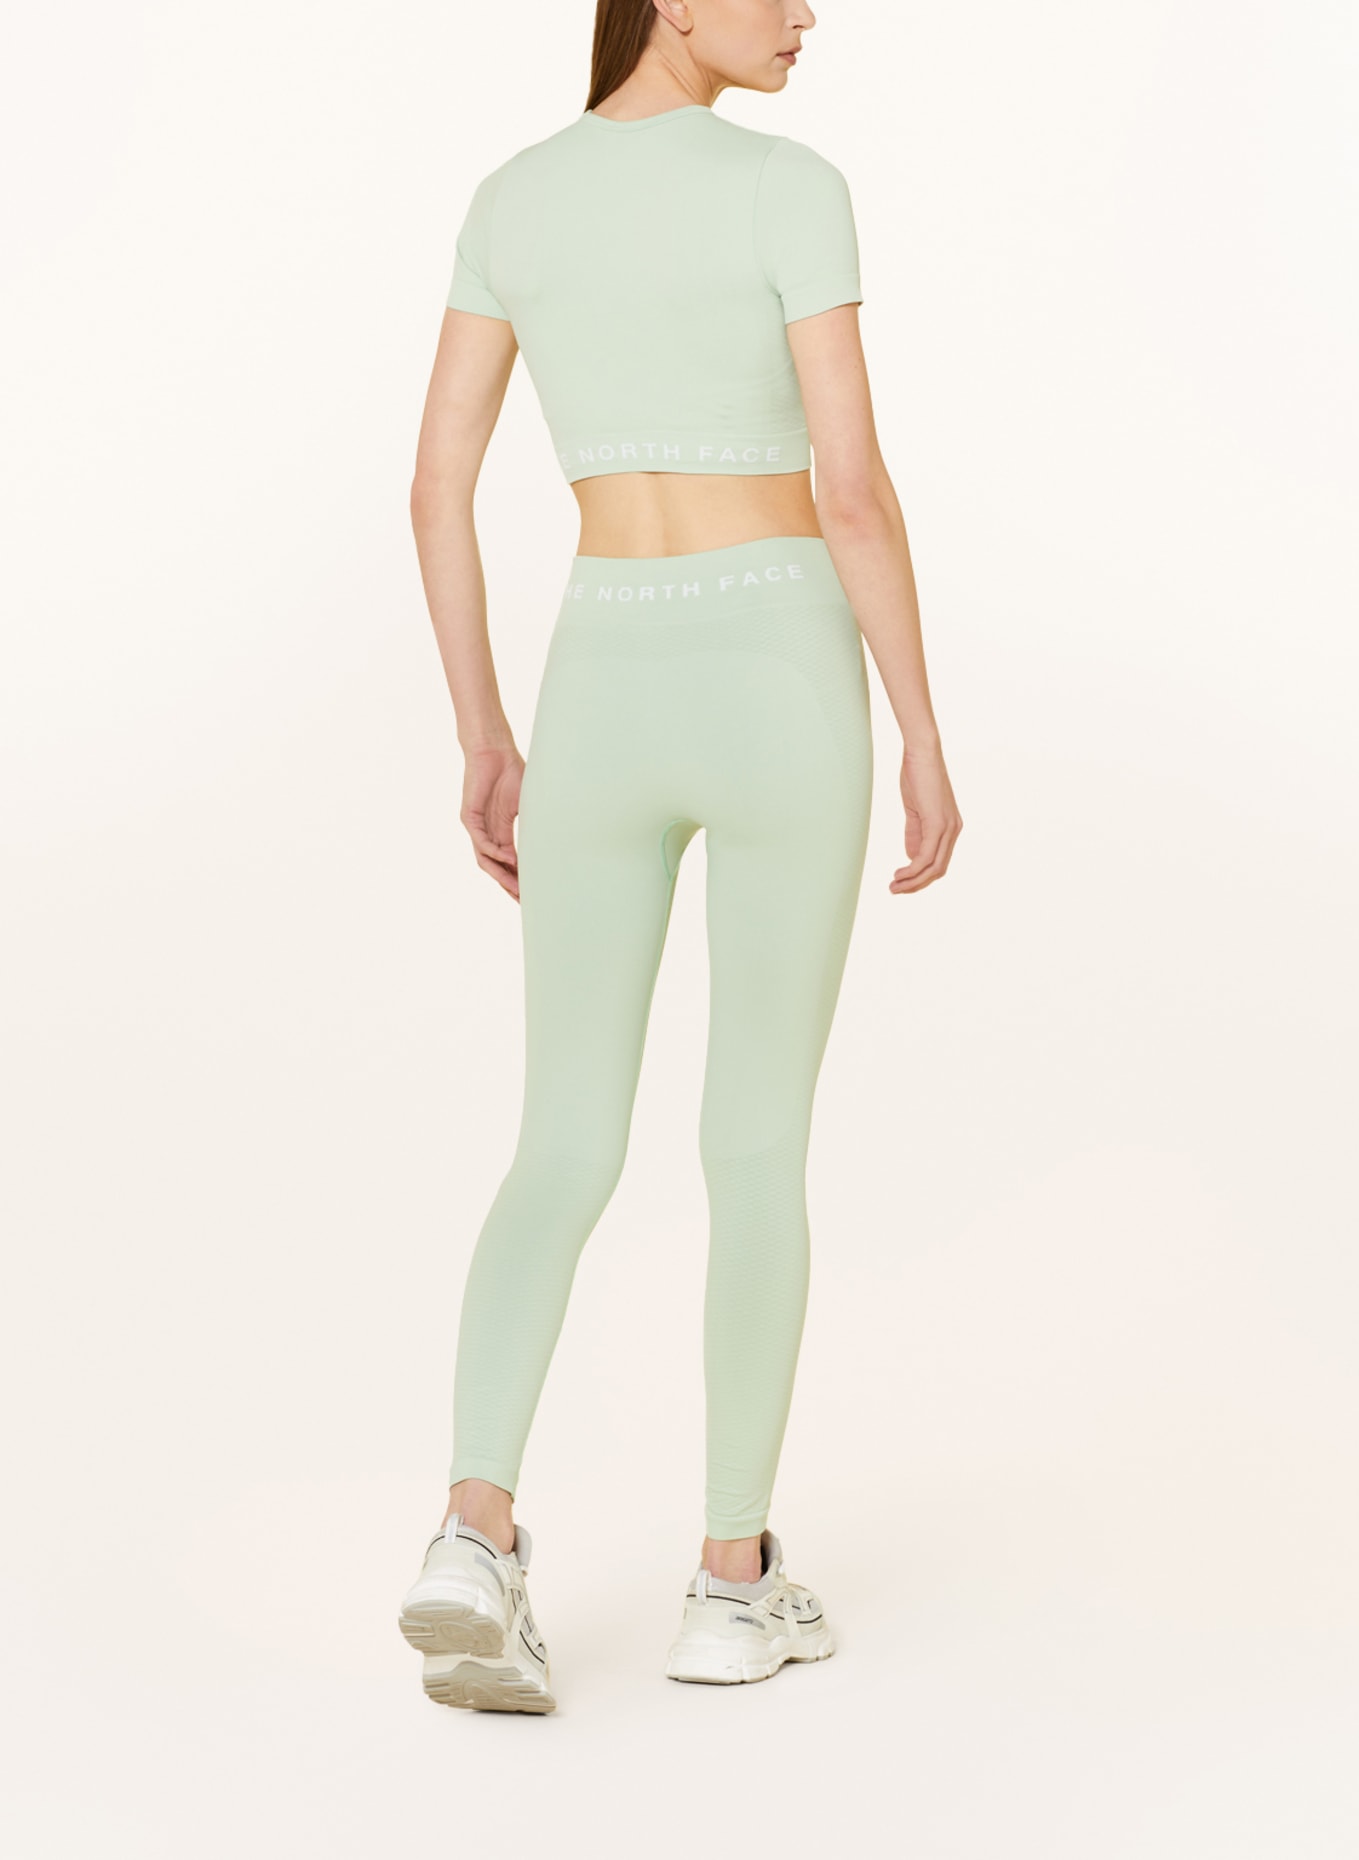 THE NORTH FACE Cropped-Shirt NEW SEAMLESS, Farbe: MINT (Bild 3)